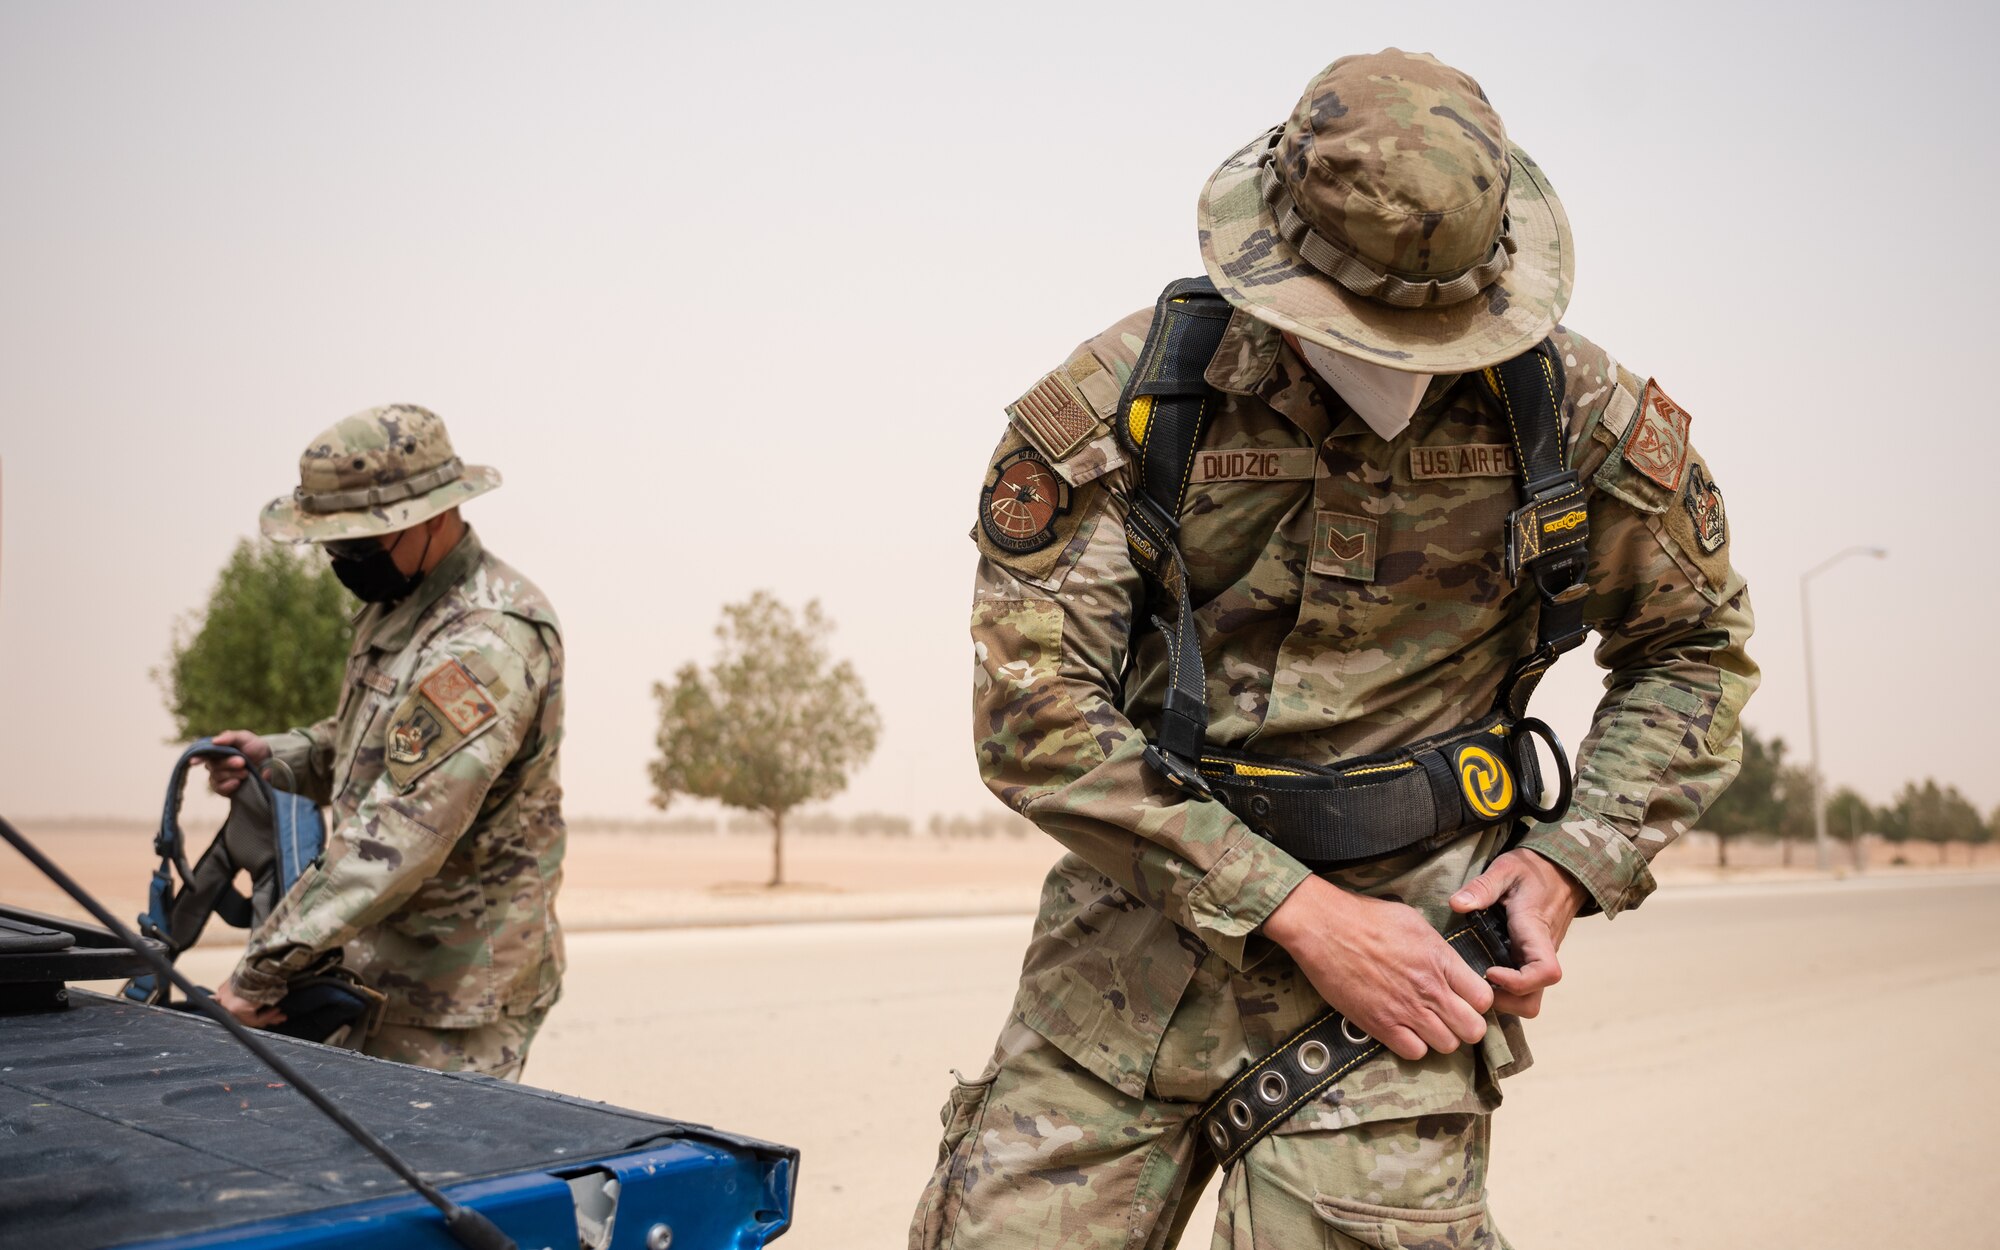 Airman 1st Class Keith Miller and Staff Sgt. Norbert Dudzic, 378th Expeditionary Communications Squadron cable and antenna systems technicians, don their safety harnesses prior to a fiber optic repair at Prince Sultan Air Base, Kingdom of Saudi Arabia, March 17, 2022. The 378th ECS performed the repair alongside their Royal Saudi Air Force counterparts, strengthening the interoperability between the two services. (U.S. Air Force photo by Senior Airman Jacob B. Wrightsman)